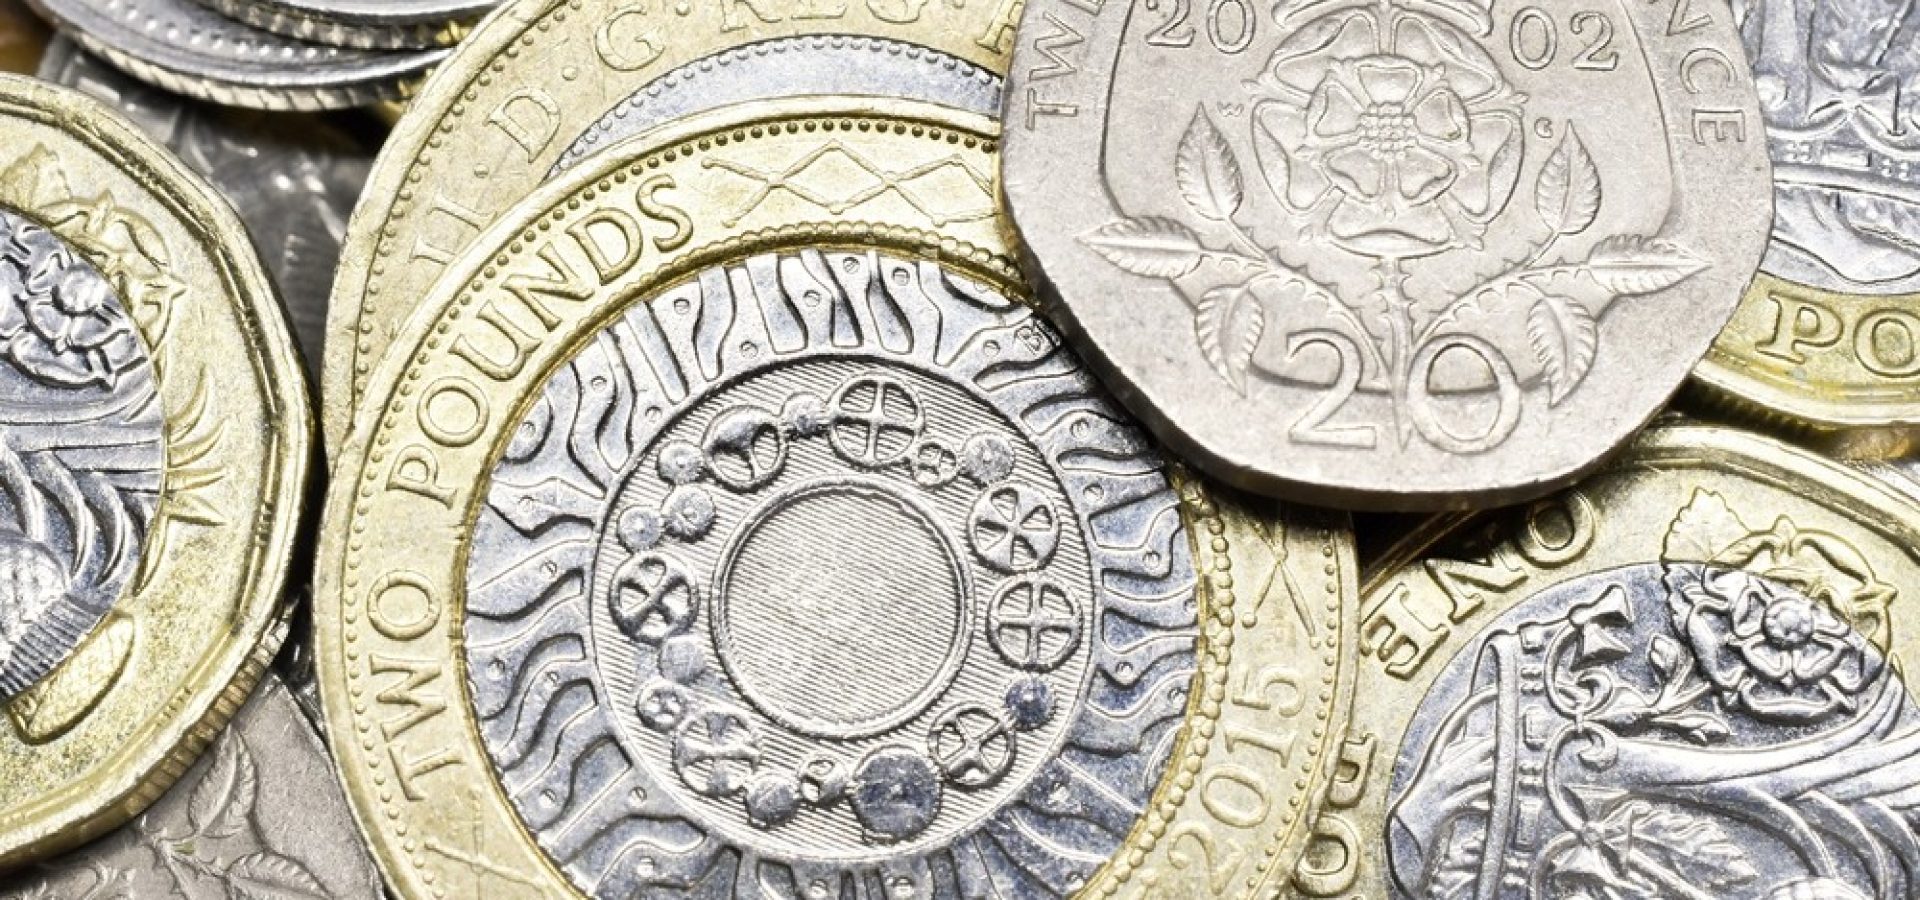 Wibest – UK Money: a close up of British pound sterling coins.